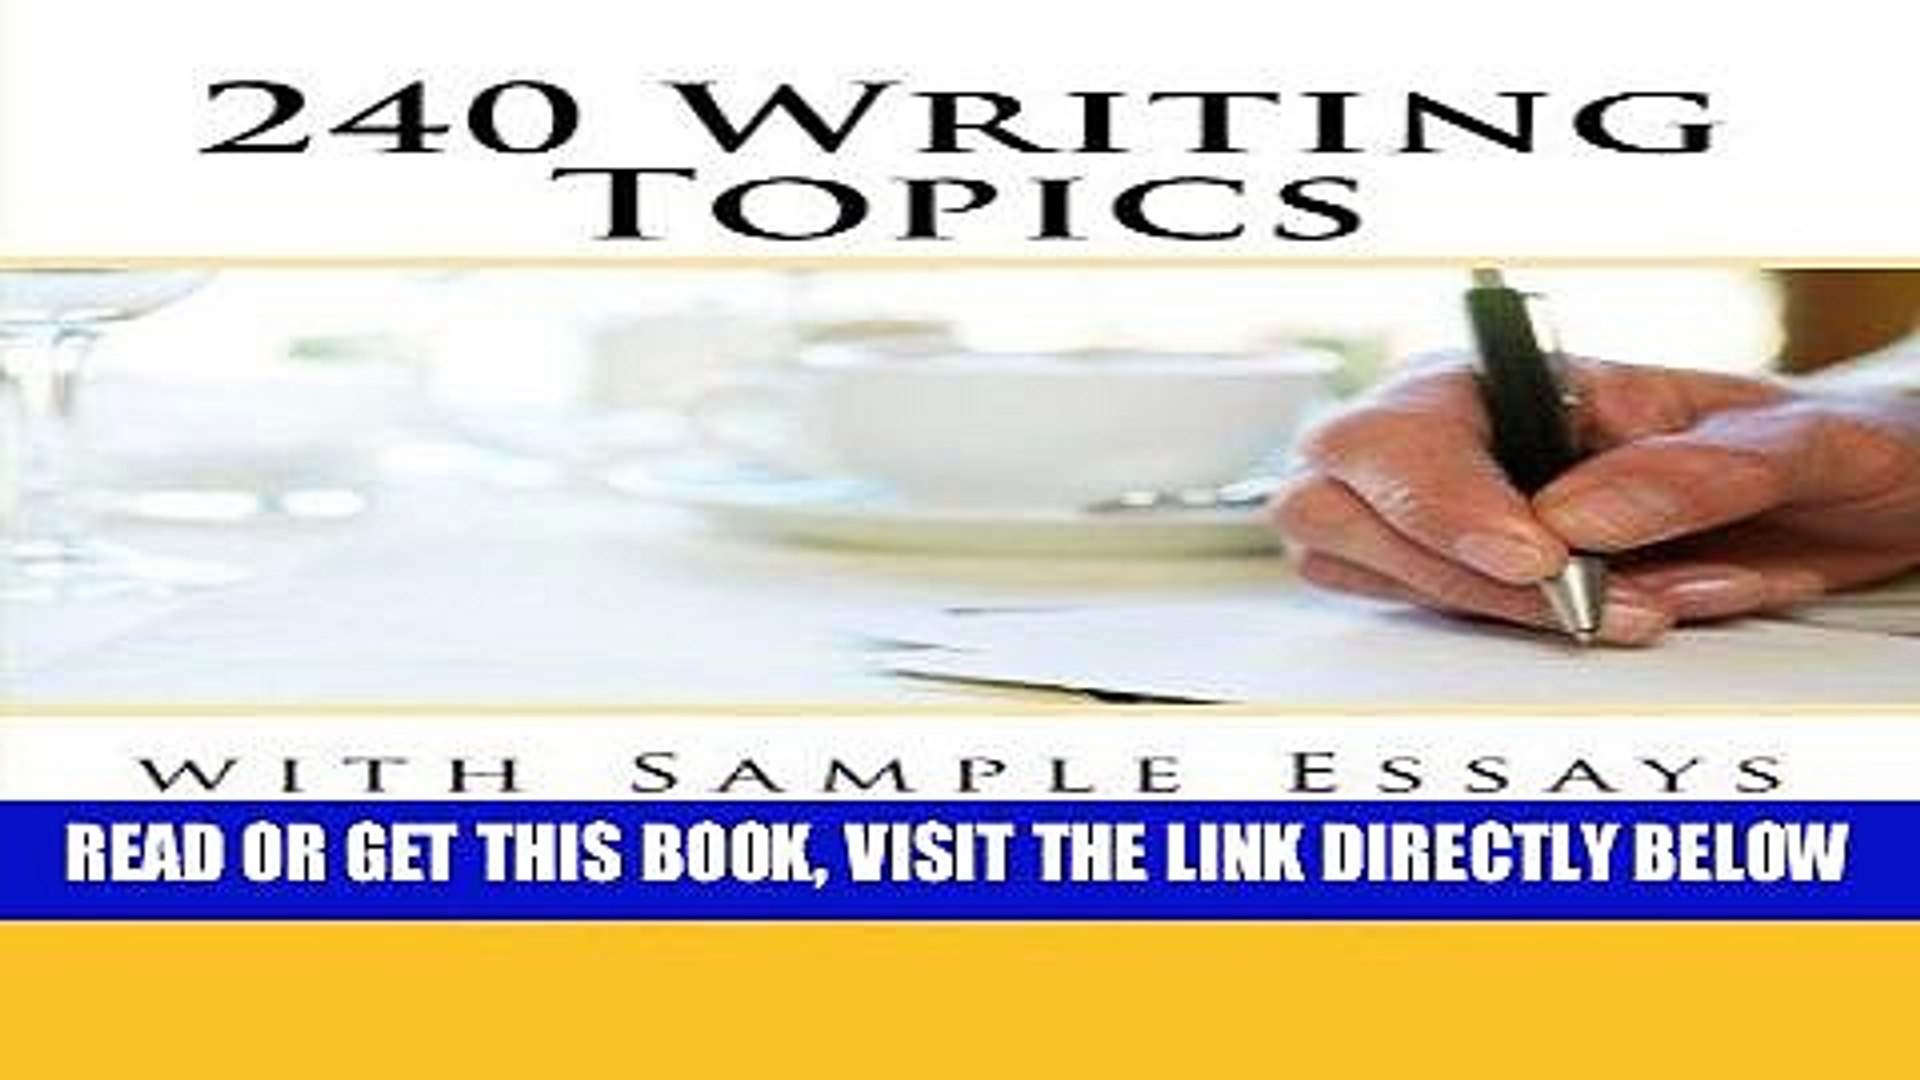 ⁣[FREE] EBOOK 240 Writing Topics: with Sample Essays (120 Writing Topics) ONLINE COLLECTION